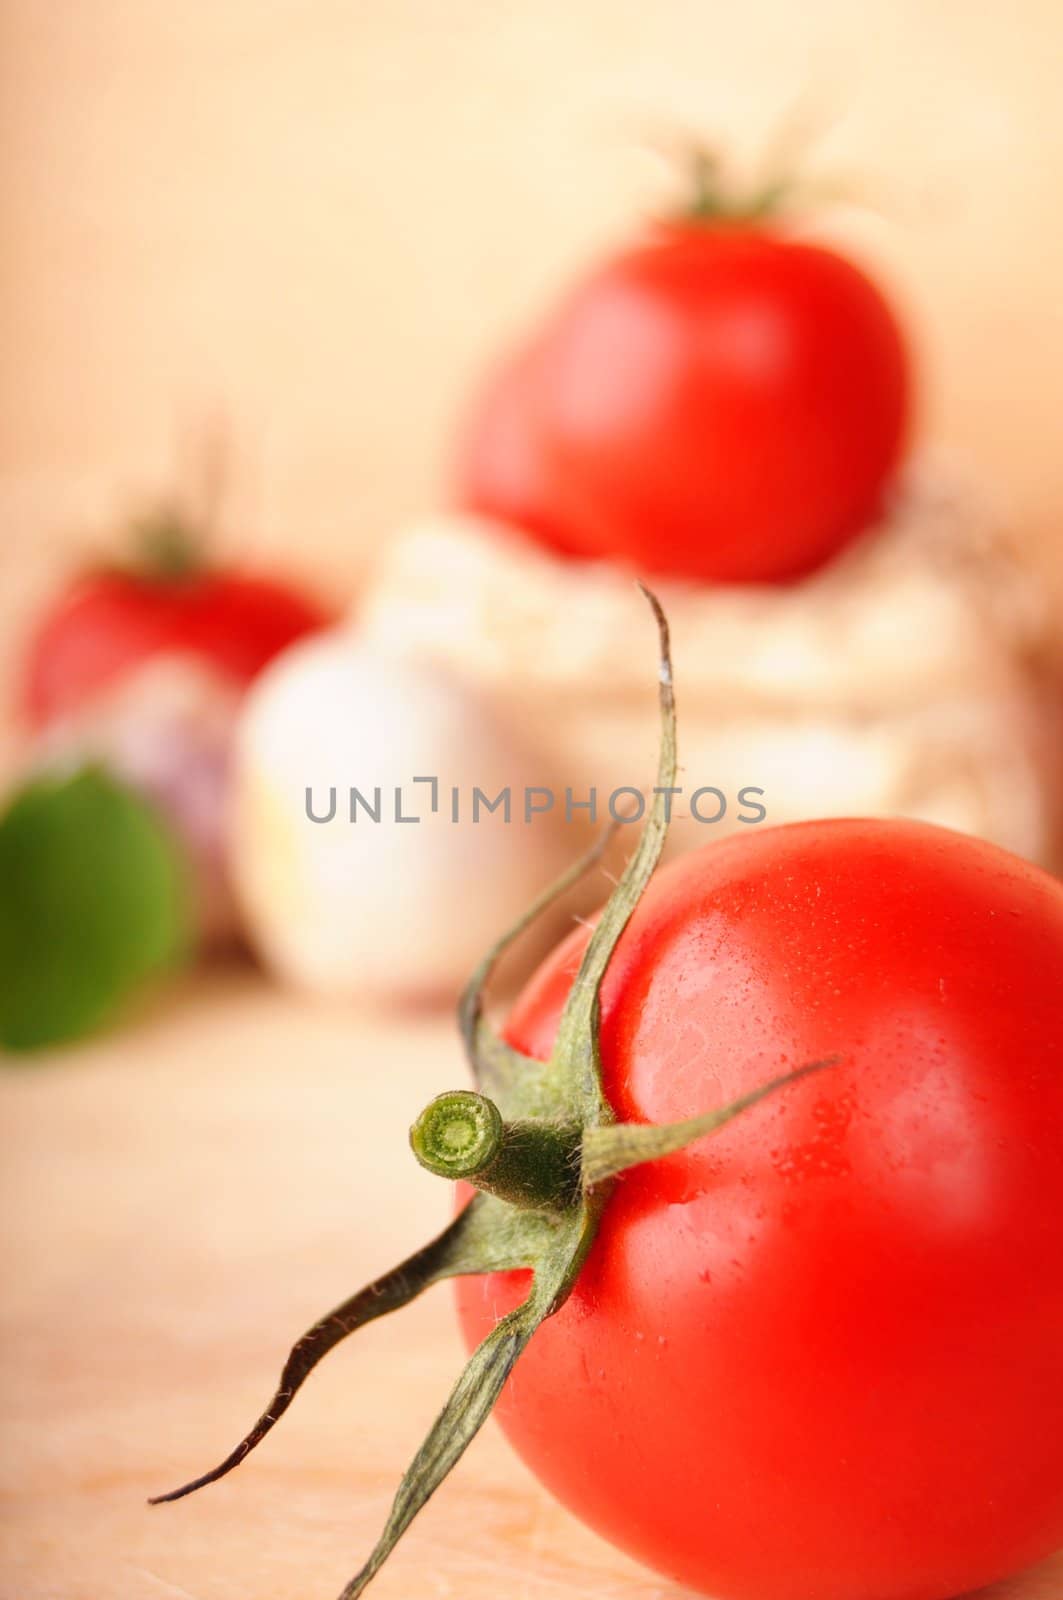 tomato vegetable by gunnar3000